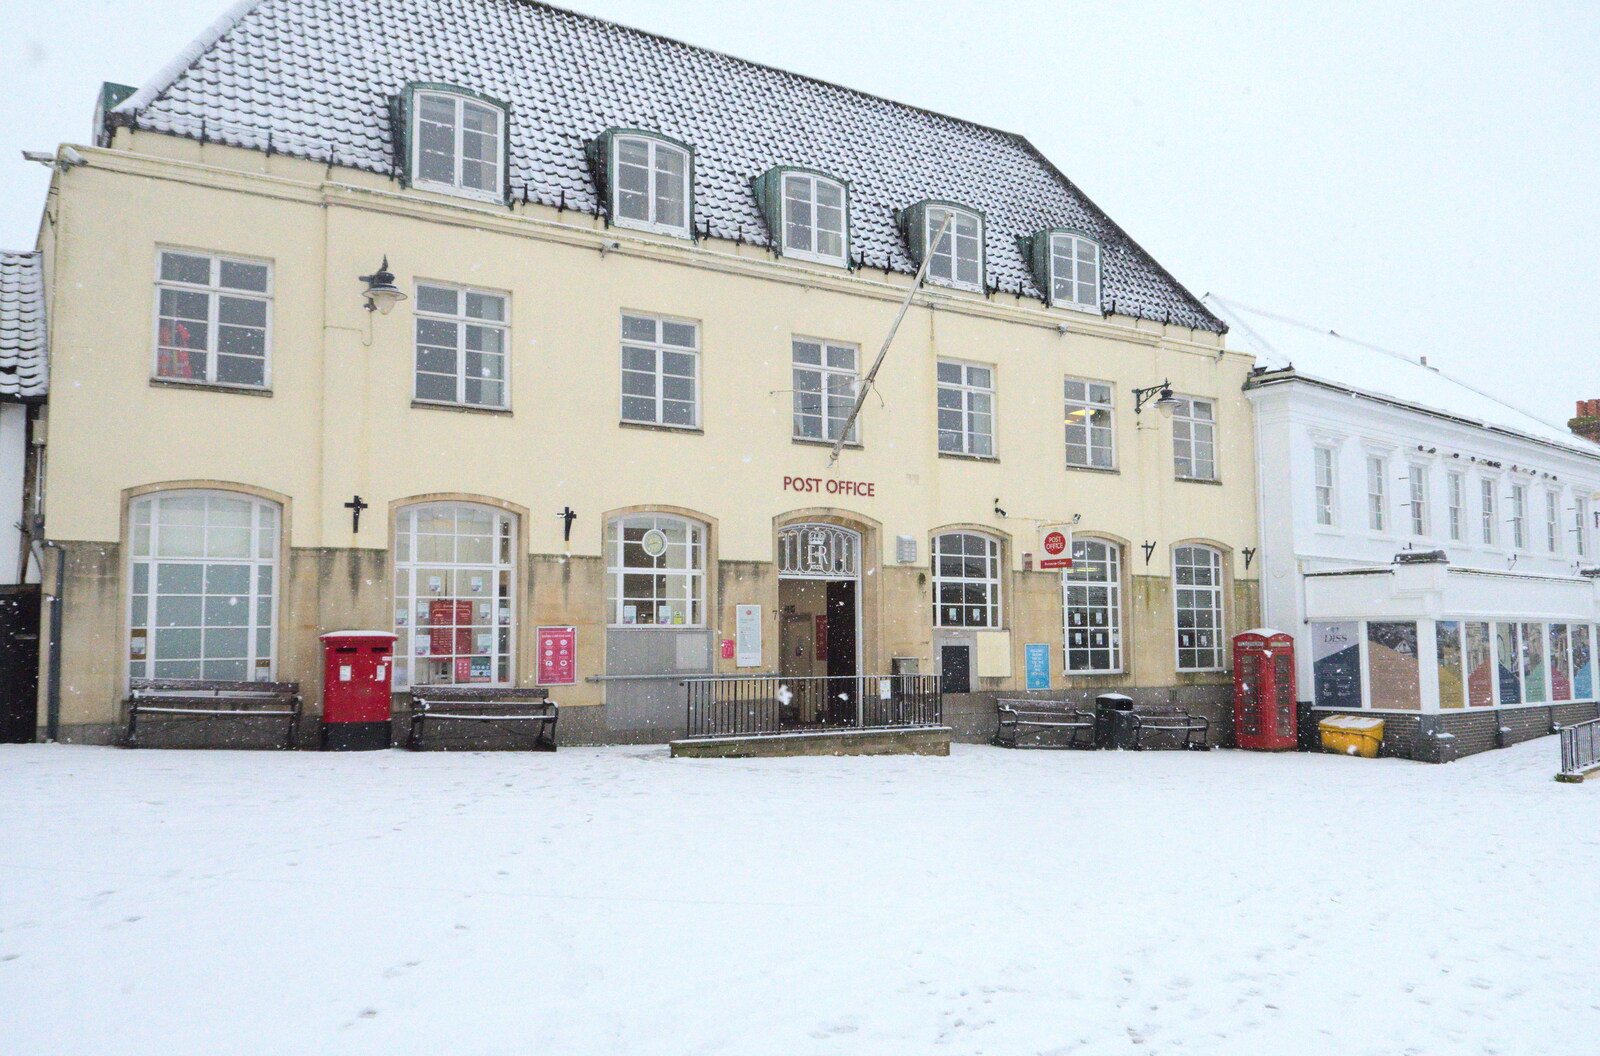 The model-railway Post Office from A Snowy Morning, Diss, Norfolk - 16th January 2021